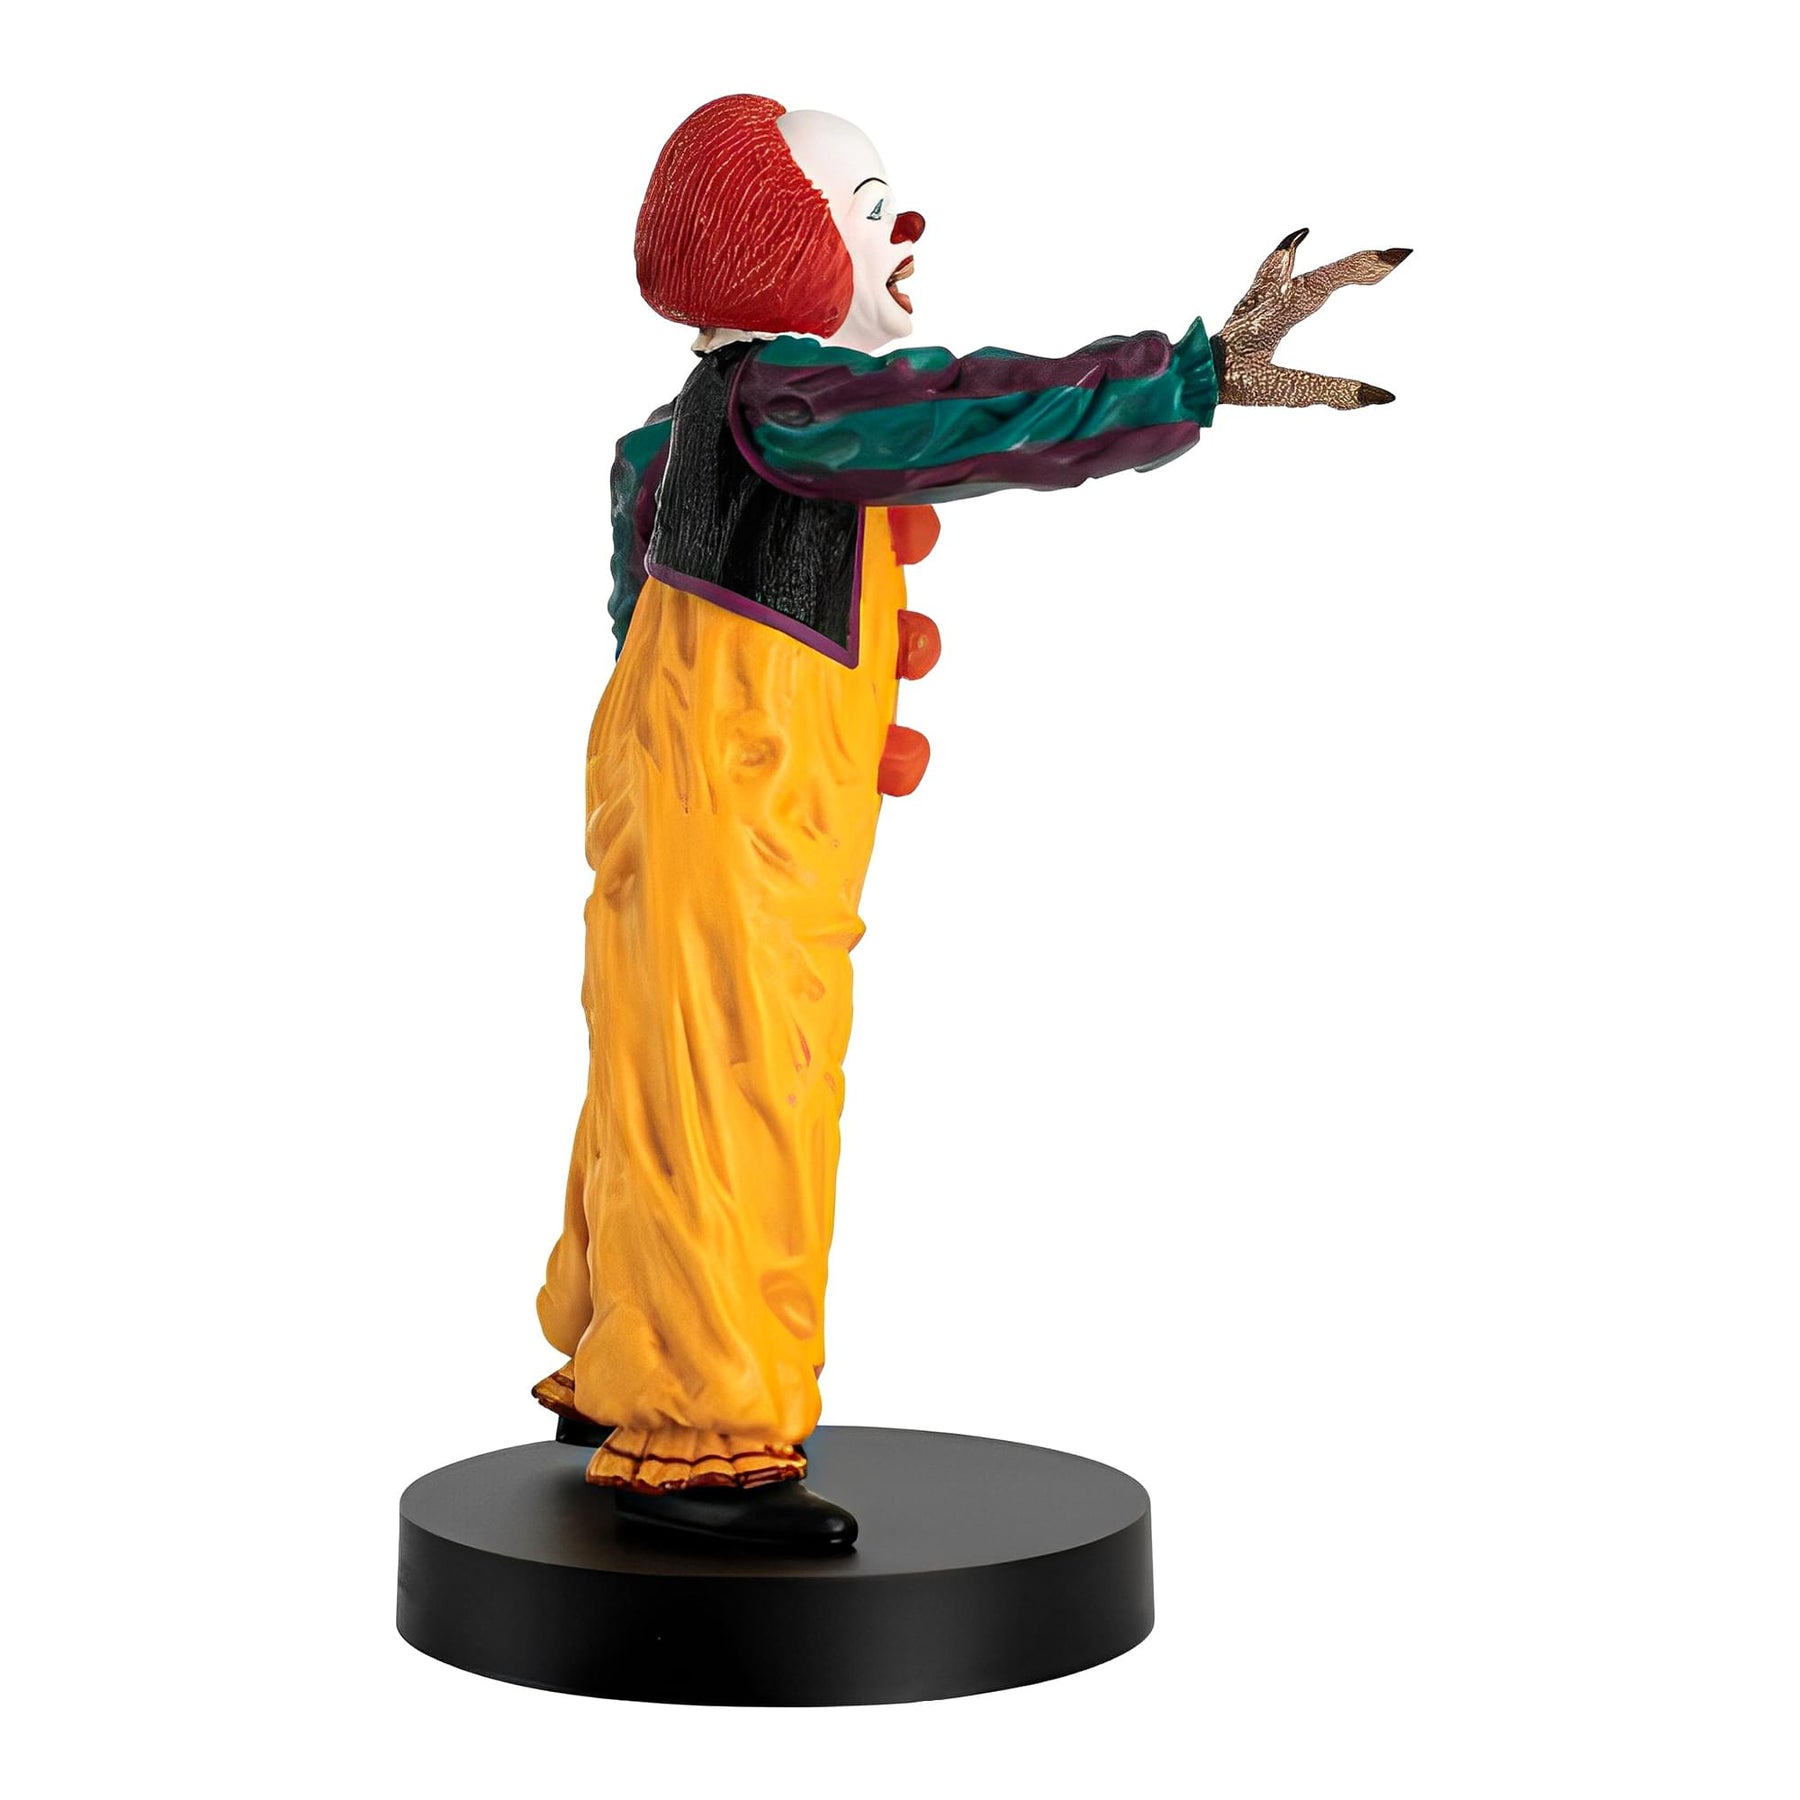 IT Pennywise (1990) 1:16 Scale Horror Figure